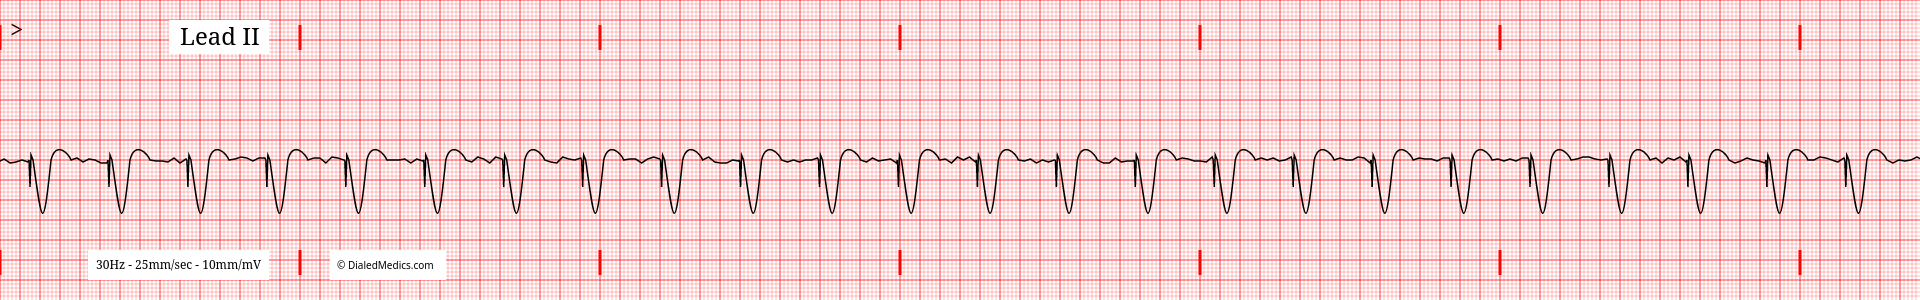 EKG tracing showing a ventricular pacemaker.